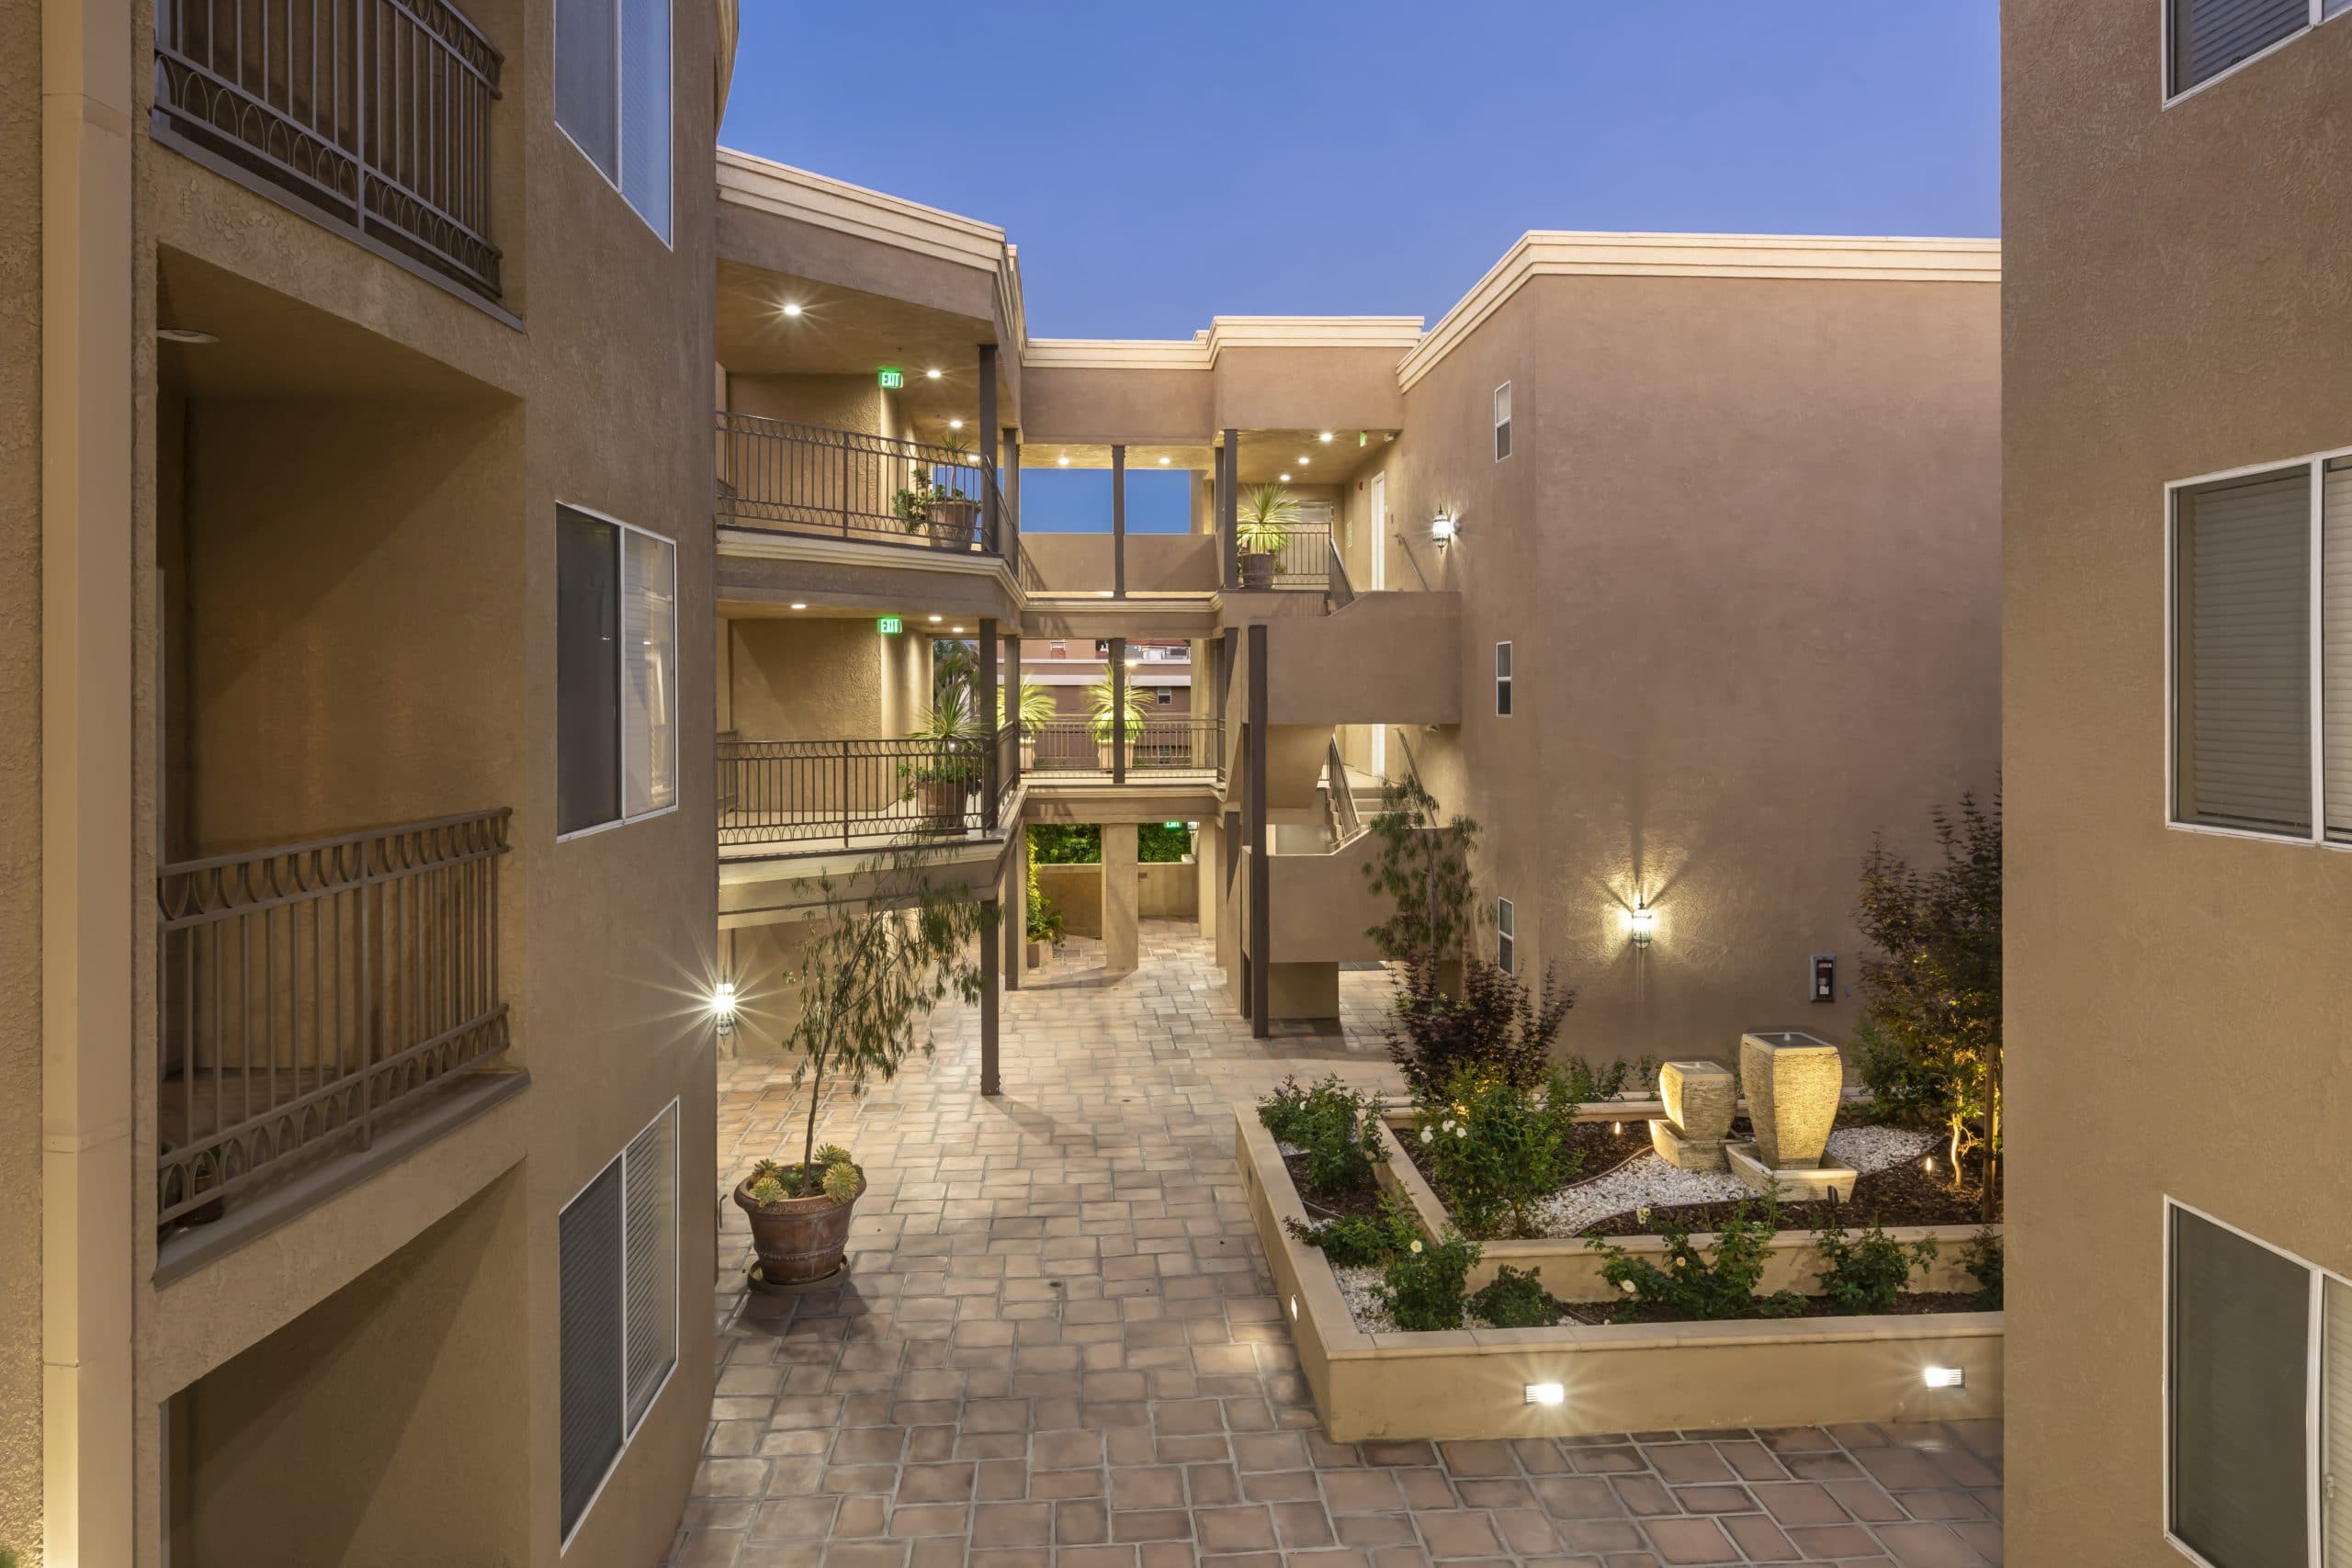 Apartments In Sherman Oaks CA Night Time Balcony View Of Courtyard And Surrounding Apartment Builings Scaled 